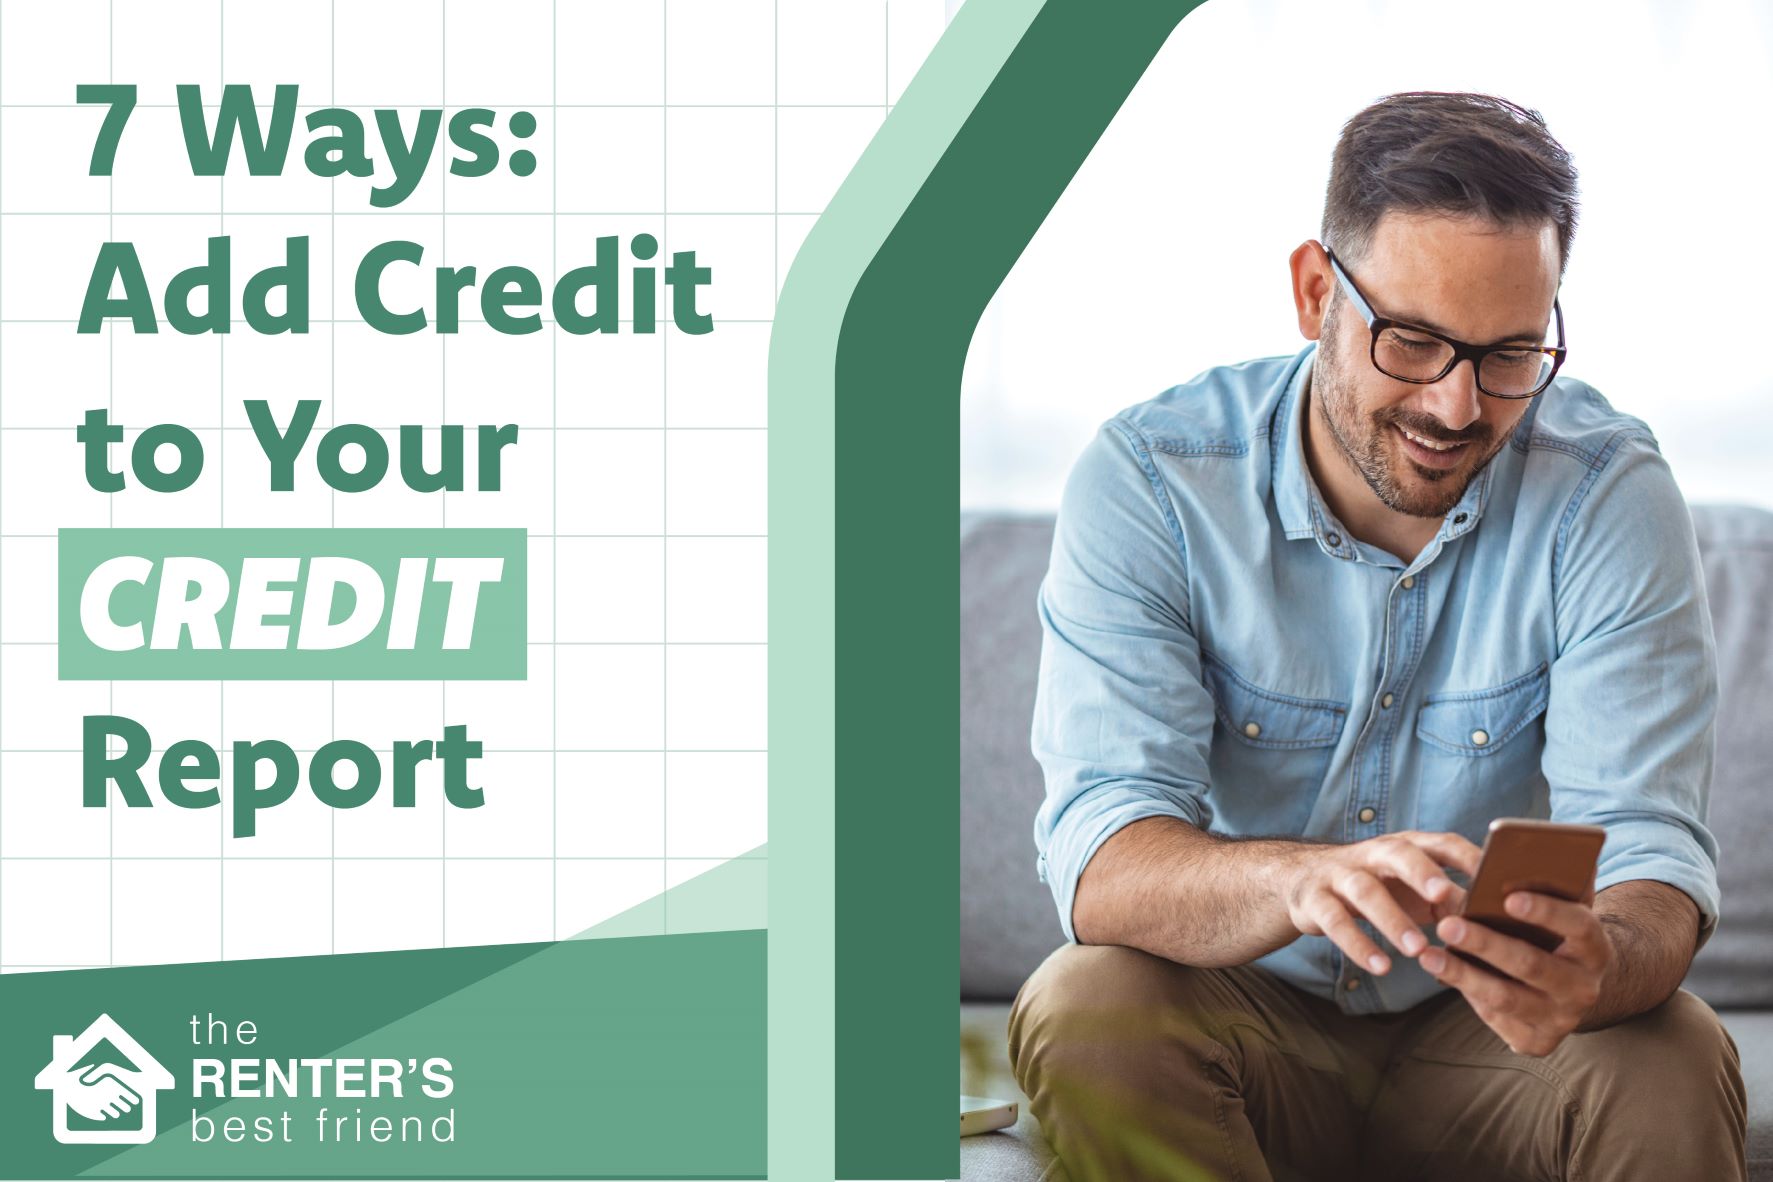 7 ways to add credit to your credit report